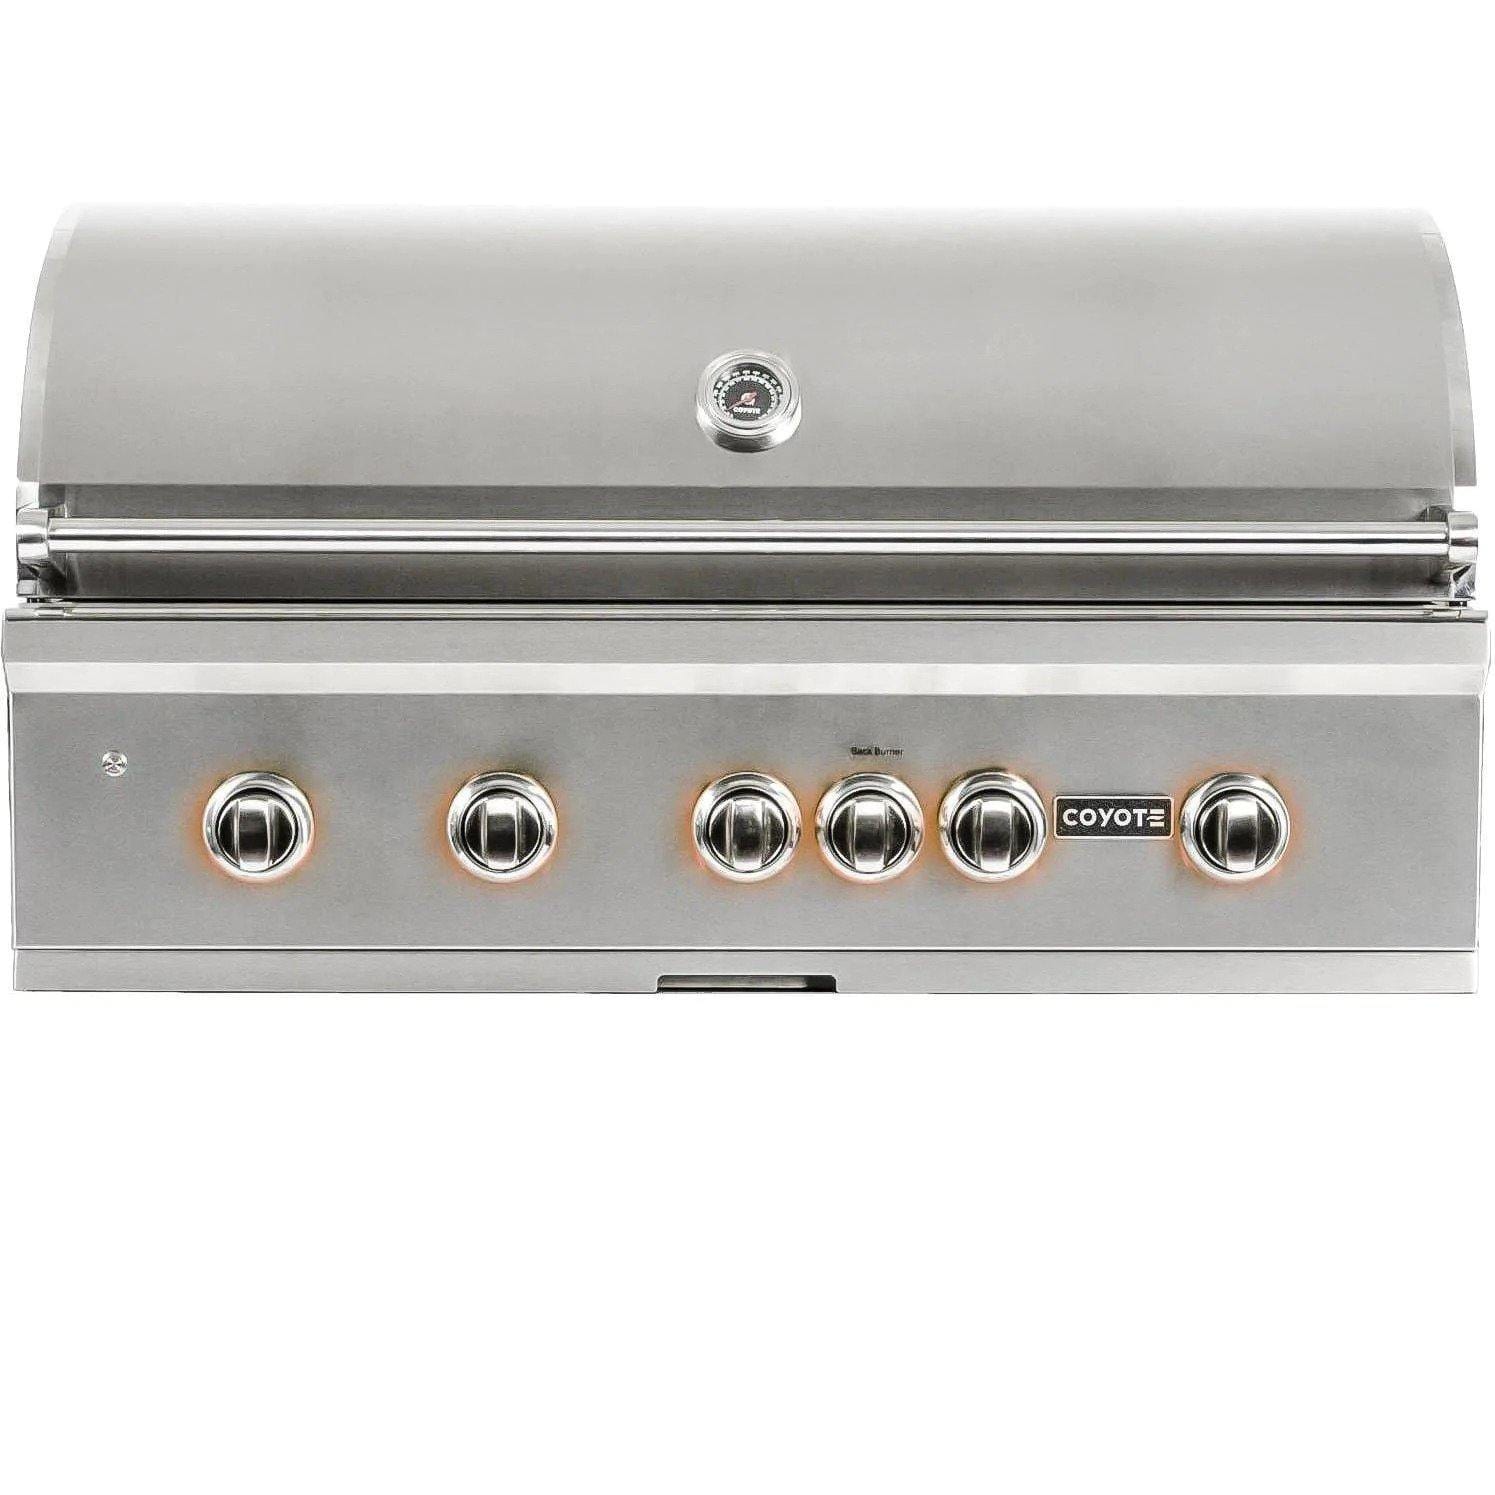 Coyote S-Series Grills Coyote - 42" Grill Built-in; LED Lights; Ceramics